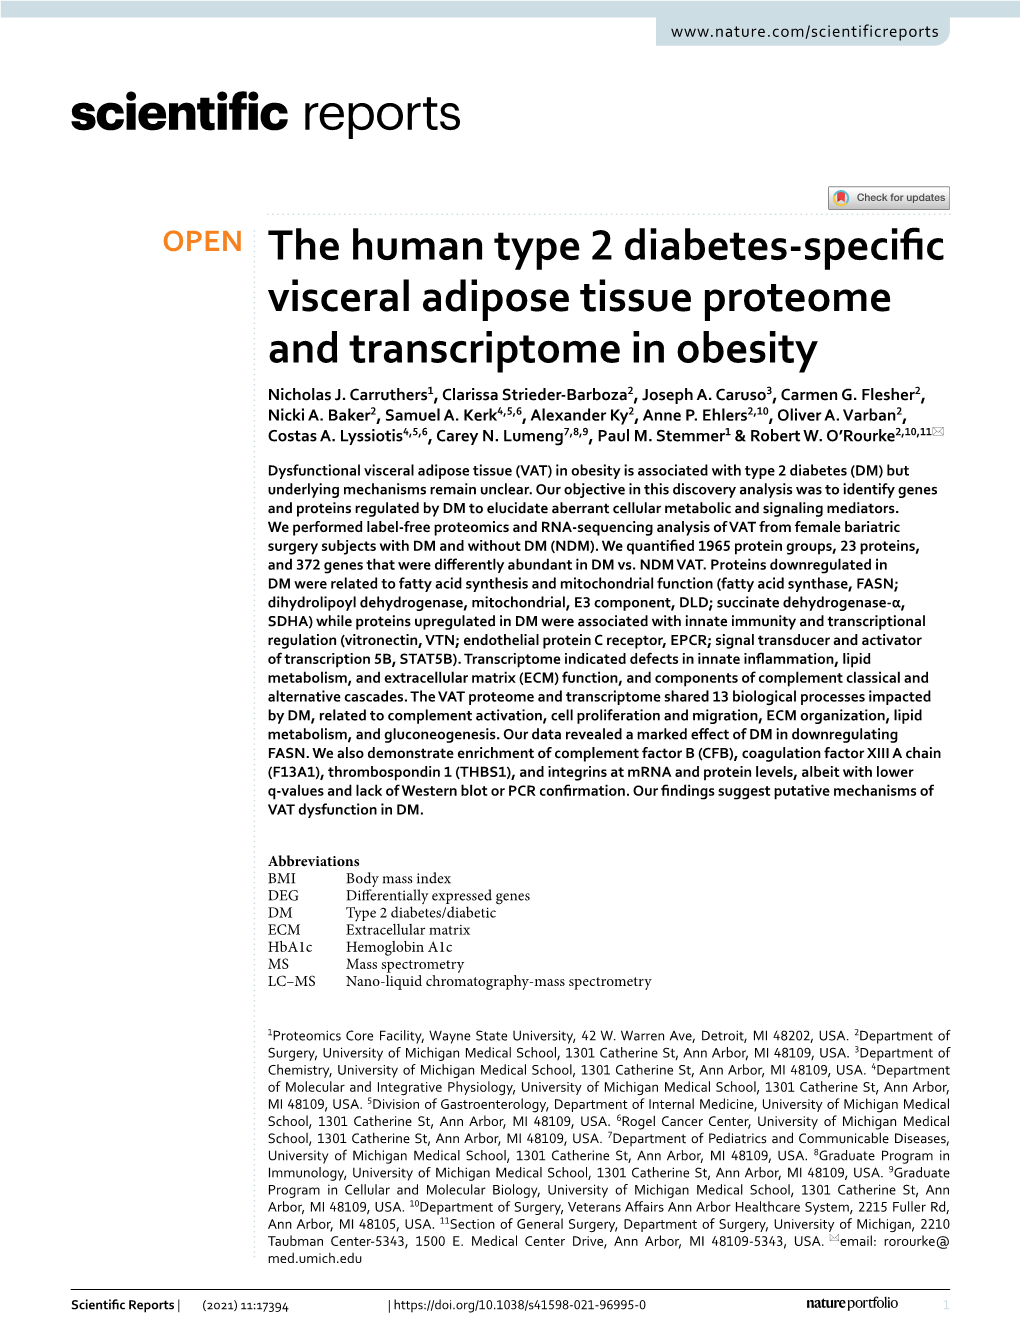 The Human Type 2 Diabetes-Specific Visceral Adipose Tissue Proteome